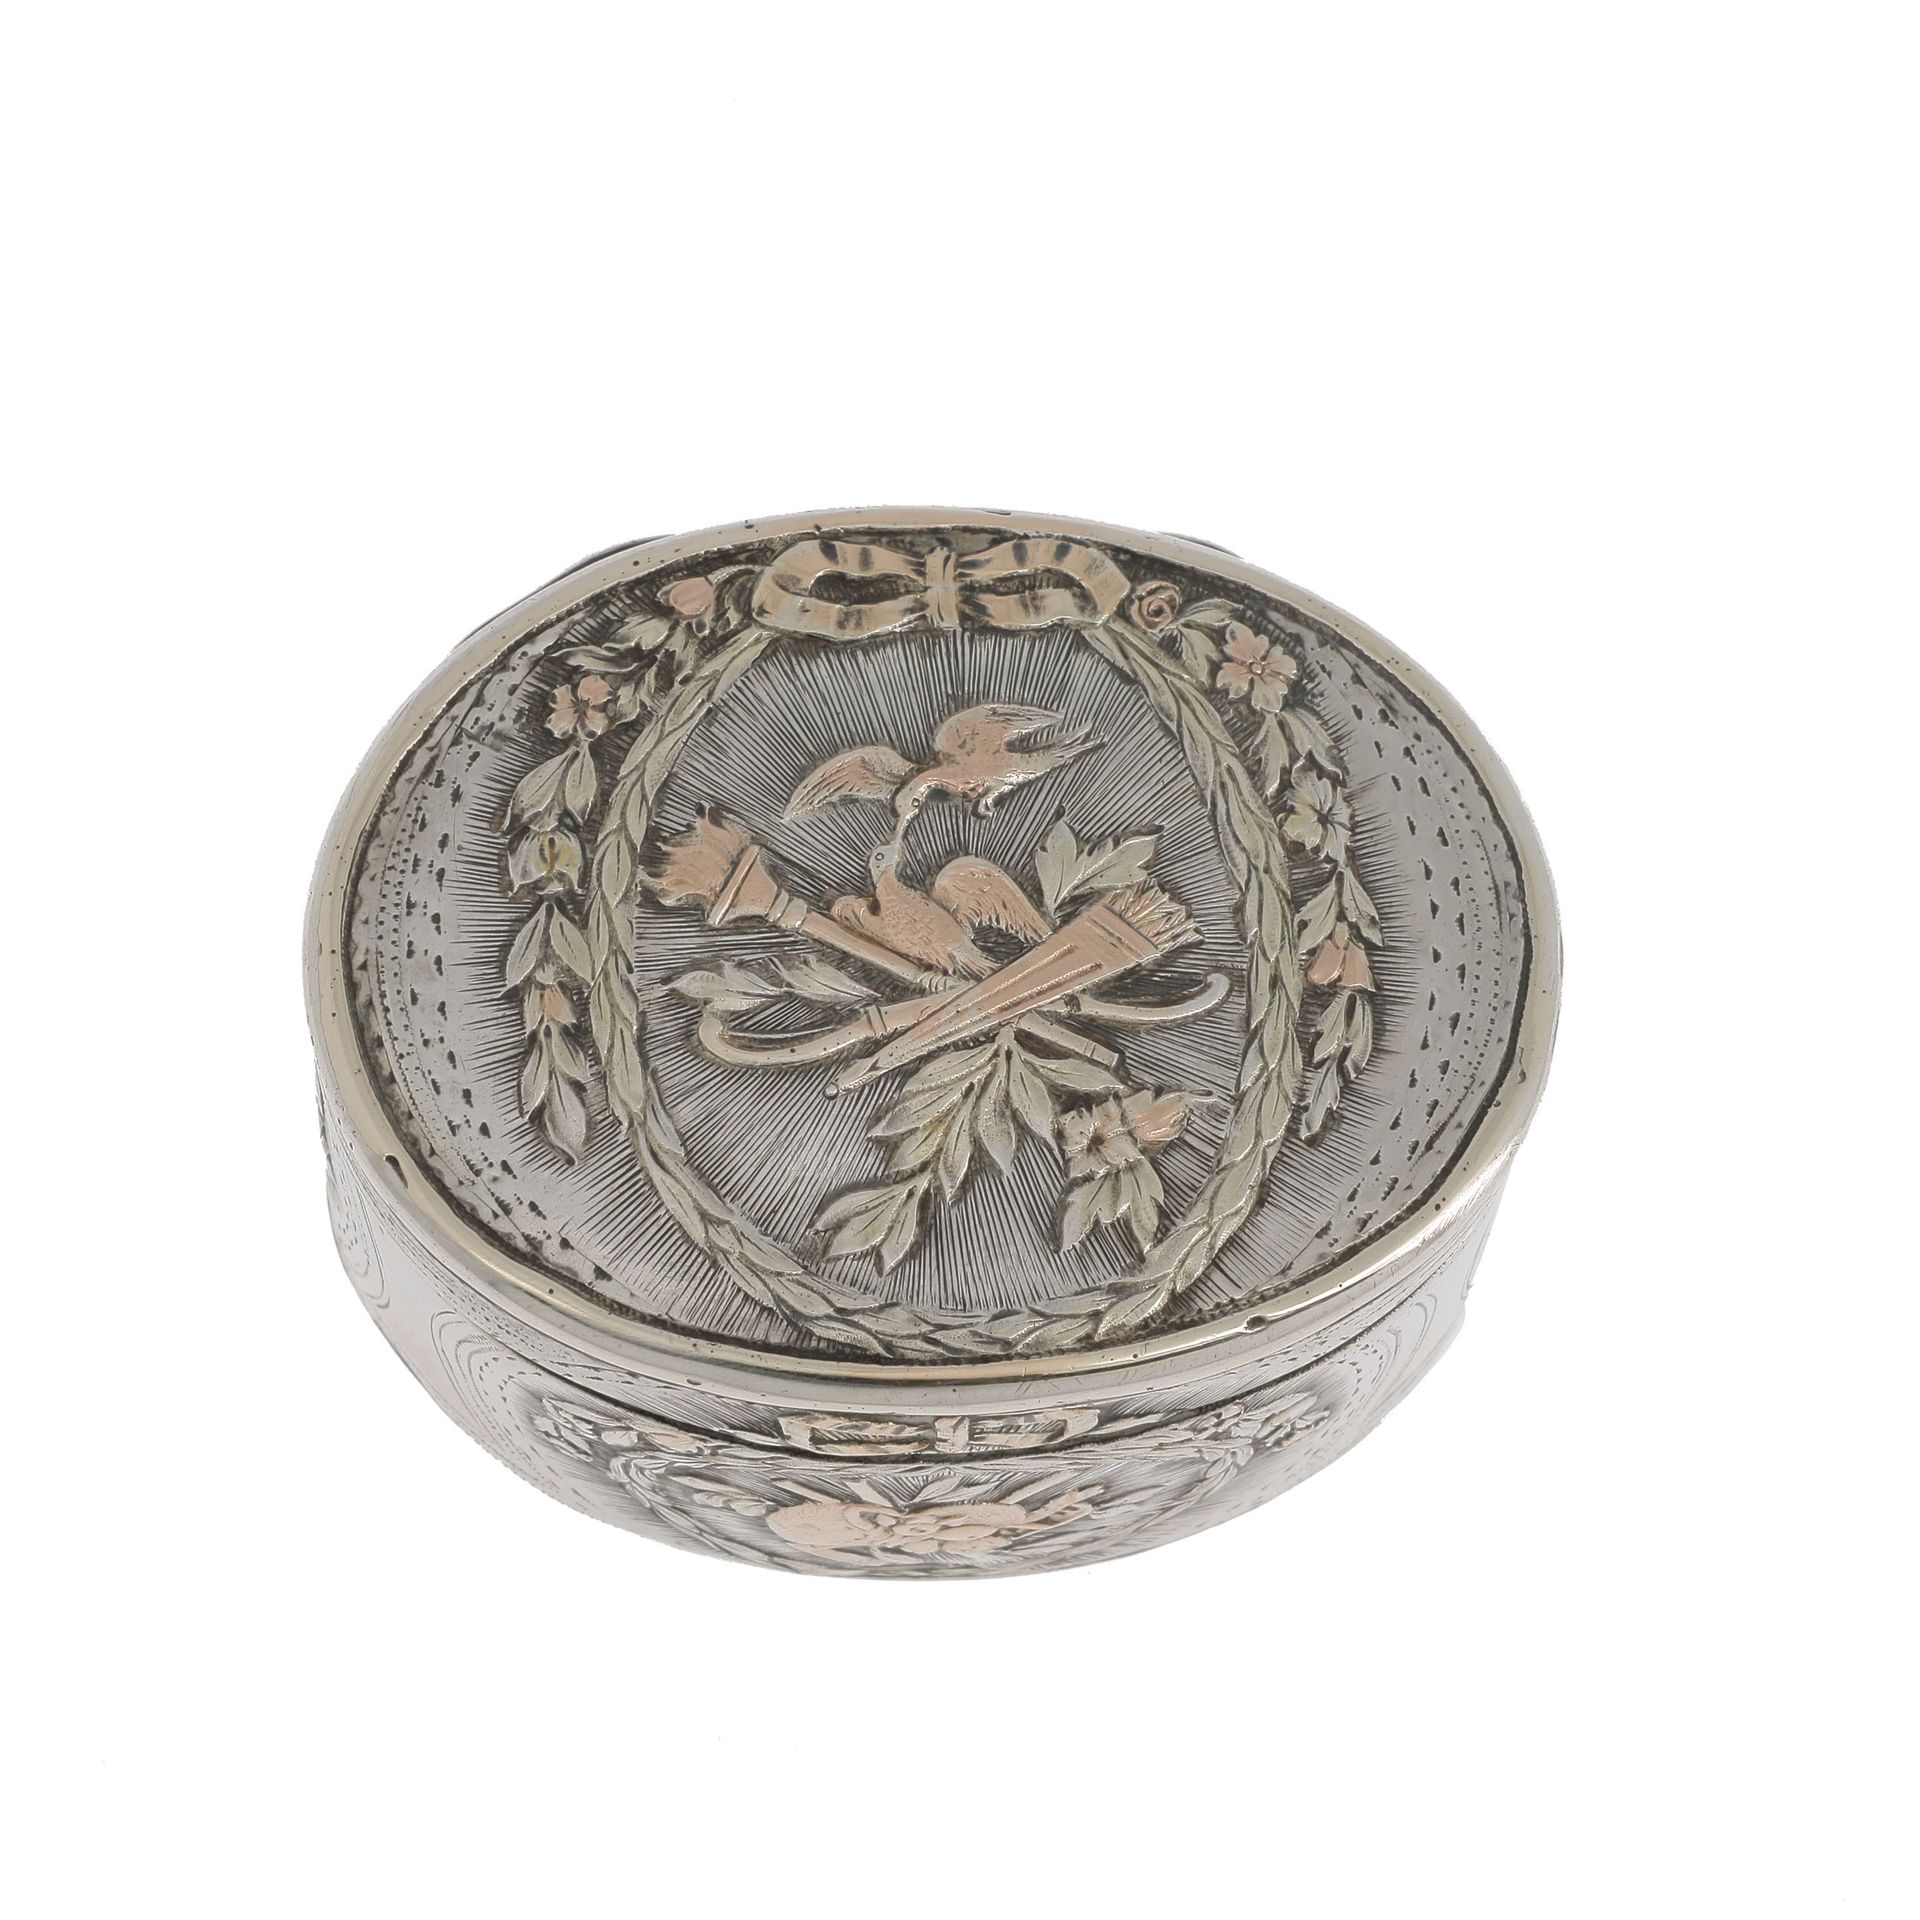 Null OVAL SNUFFBOX

In silver and vermeil, decorated with cartouches of country &hellip;